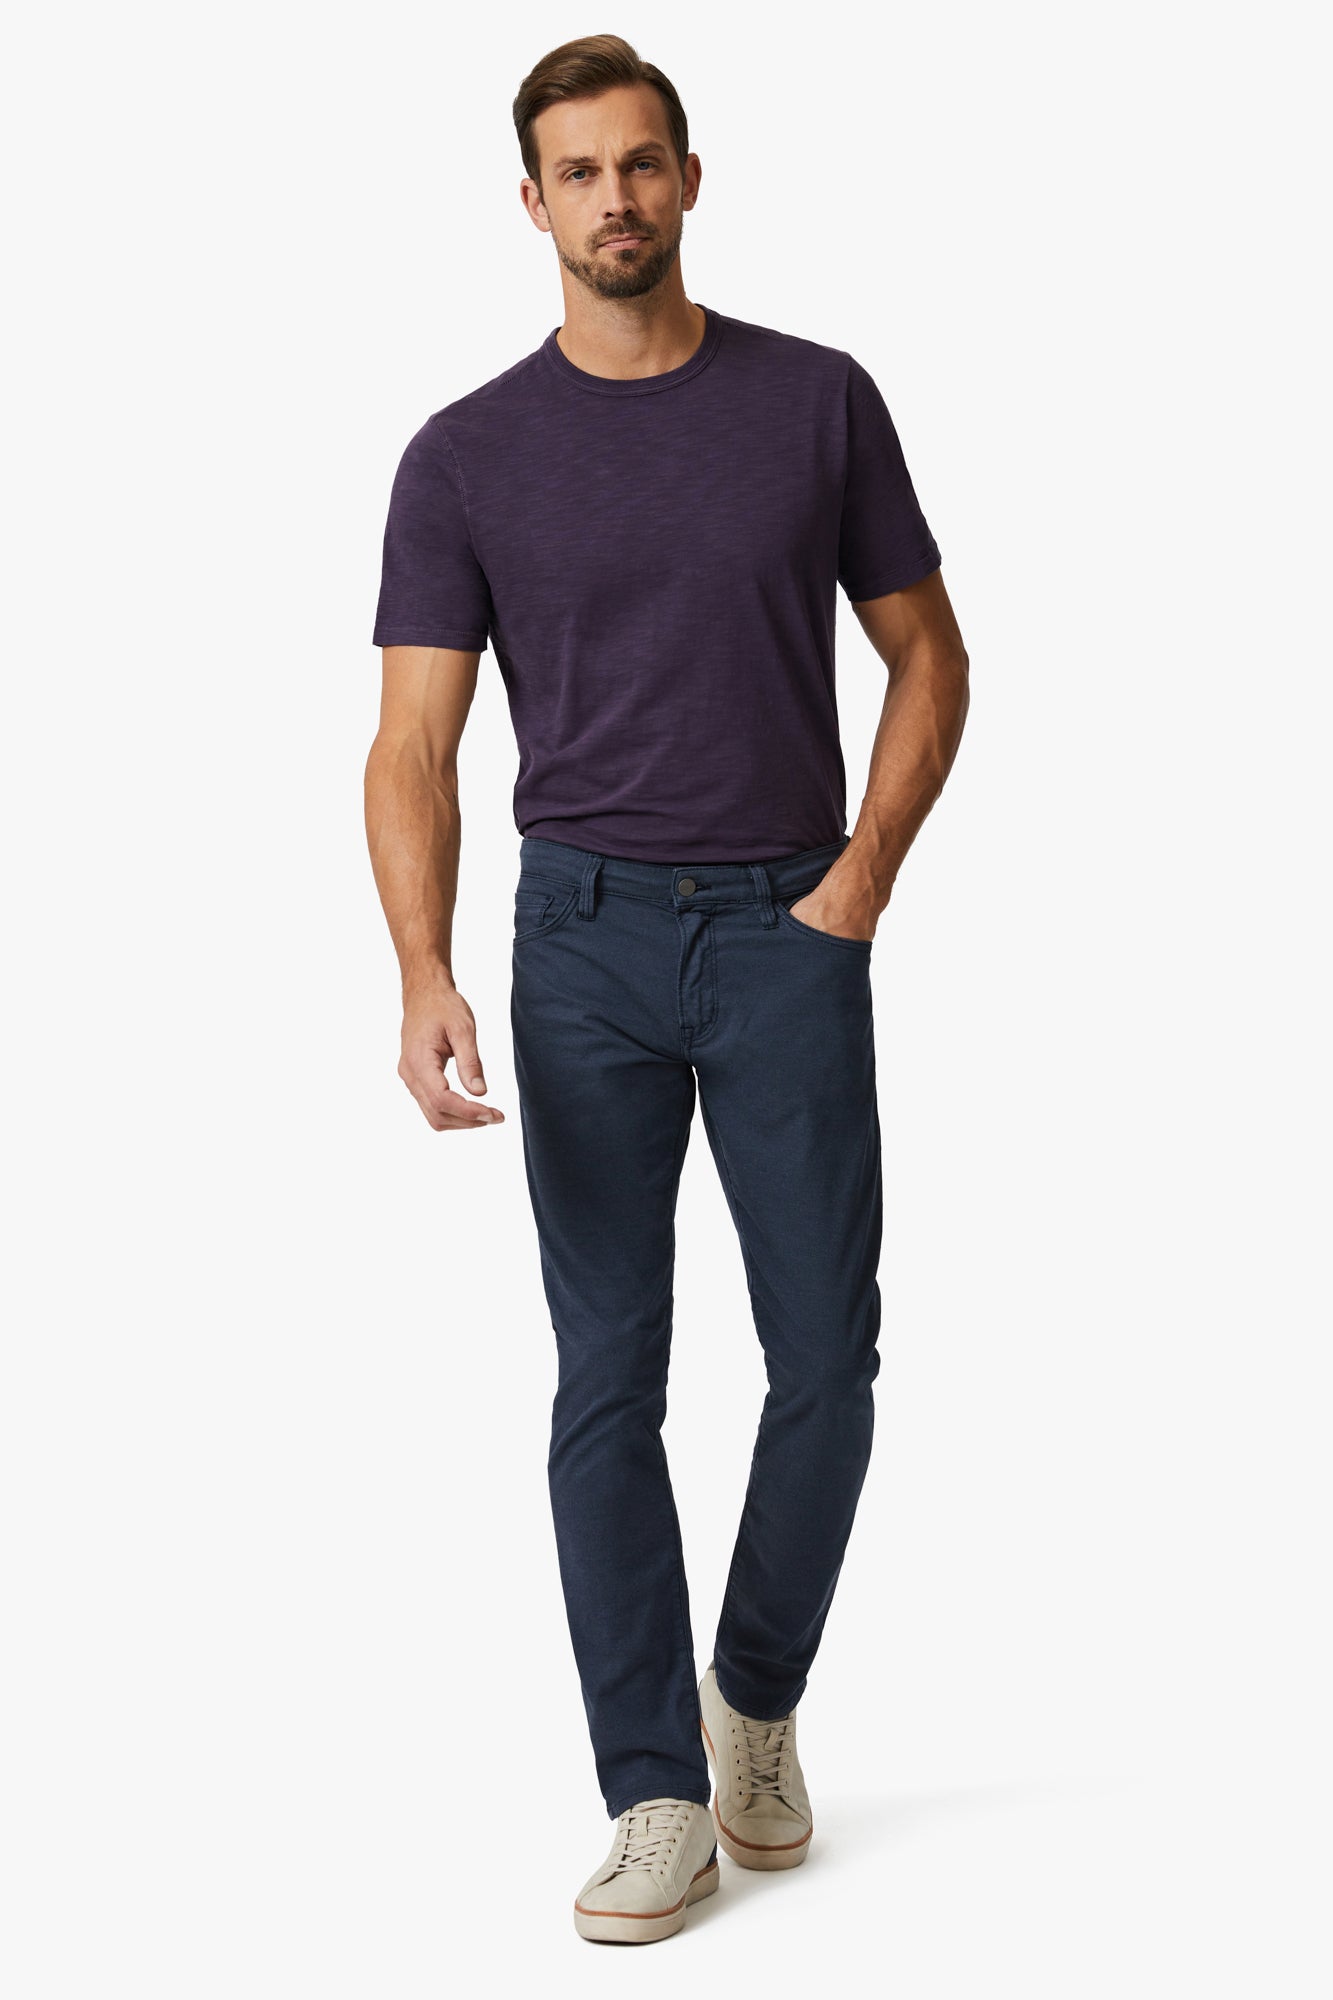 Cool Tapered Leg Pants In Navy CoolMax Image 1